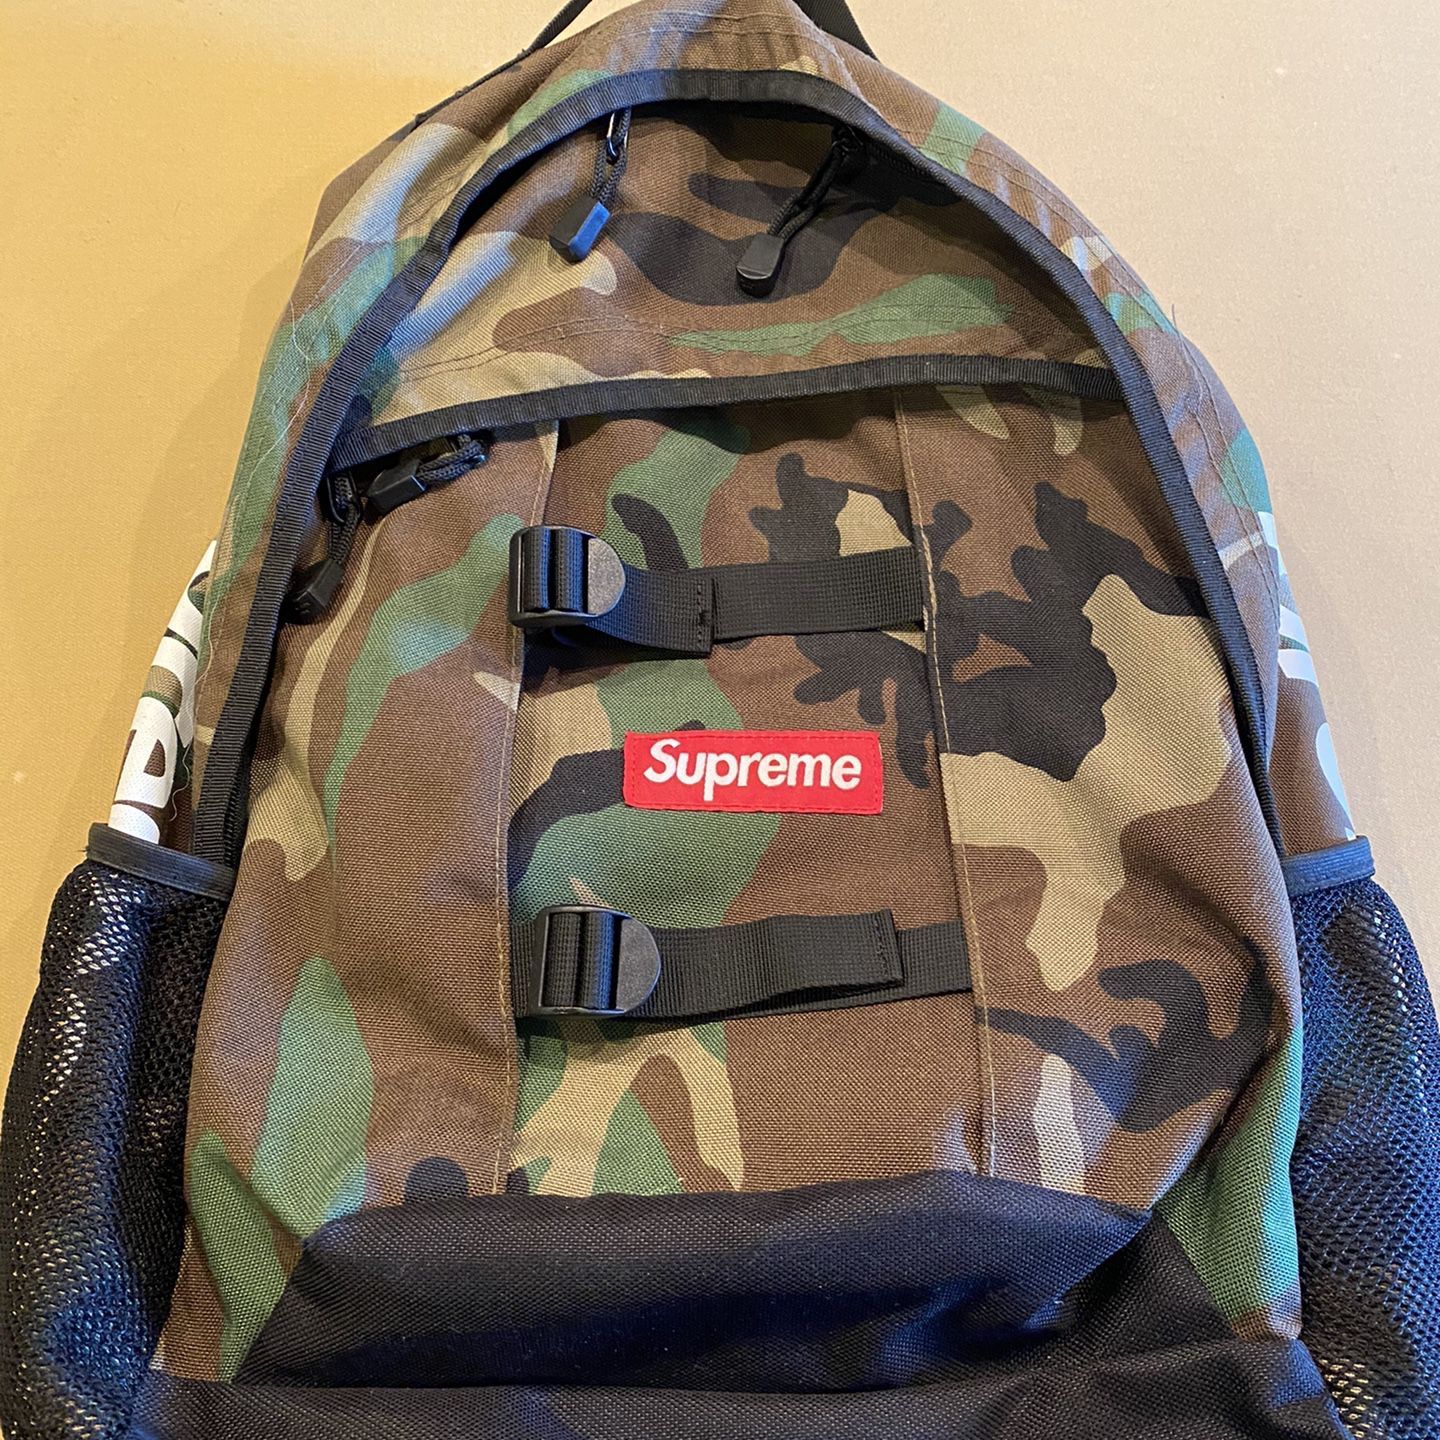 Supreme FW14 Camo Backpack for Sale in Victorville, CA - OfferUp